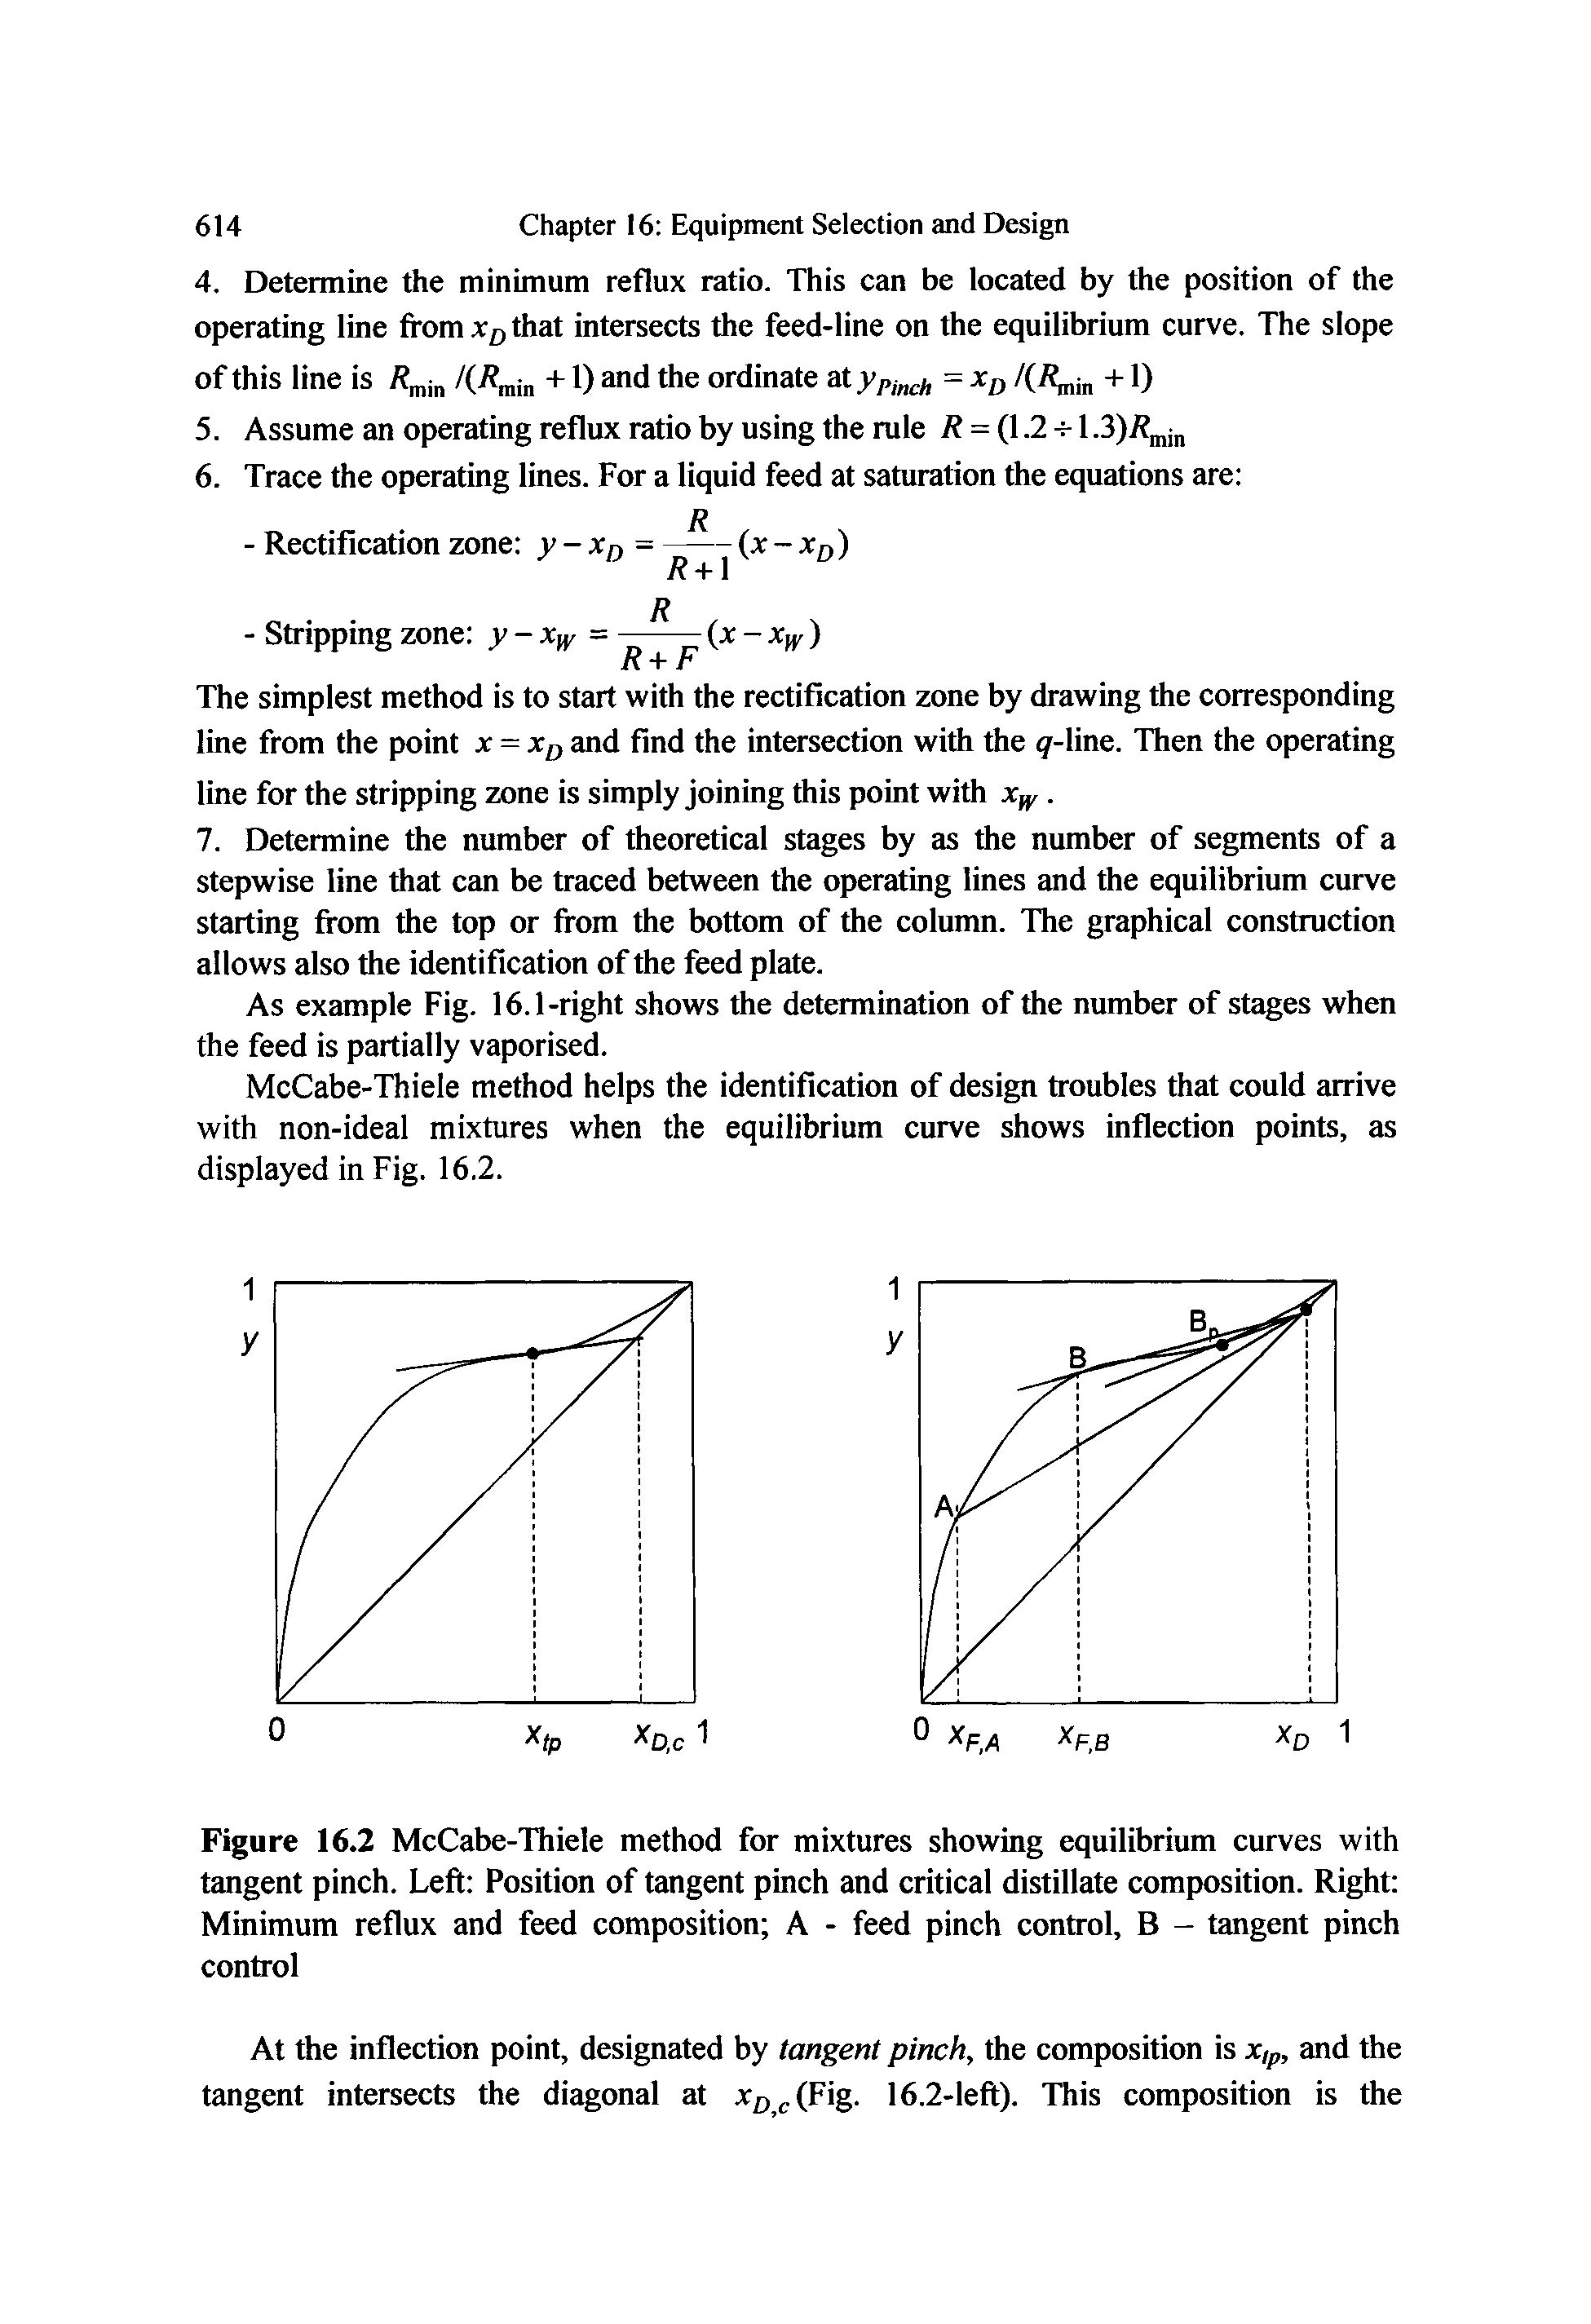 Figure 16.2 McCabe-Thiele method for mixtures showing equilibrium curves with tangent pinch. Left Position of tangent pinch and critical distillate composition. Right Minimum reflux and feed composition A - feed pinch control, B - tangent pinch control...